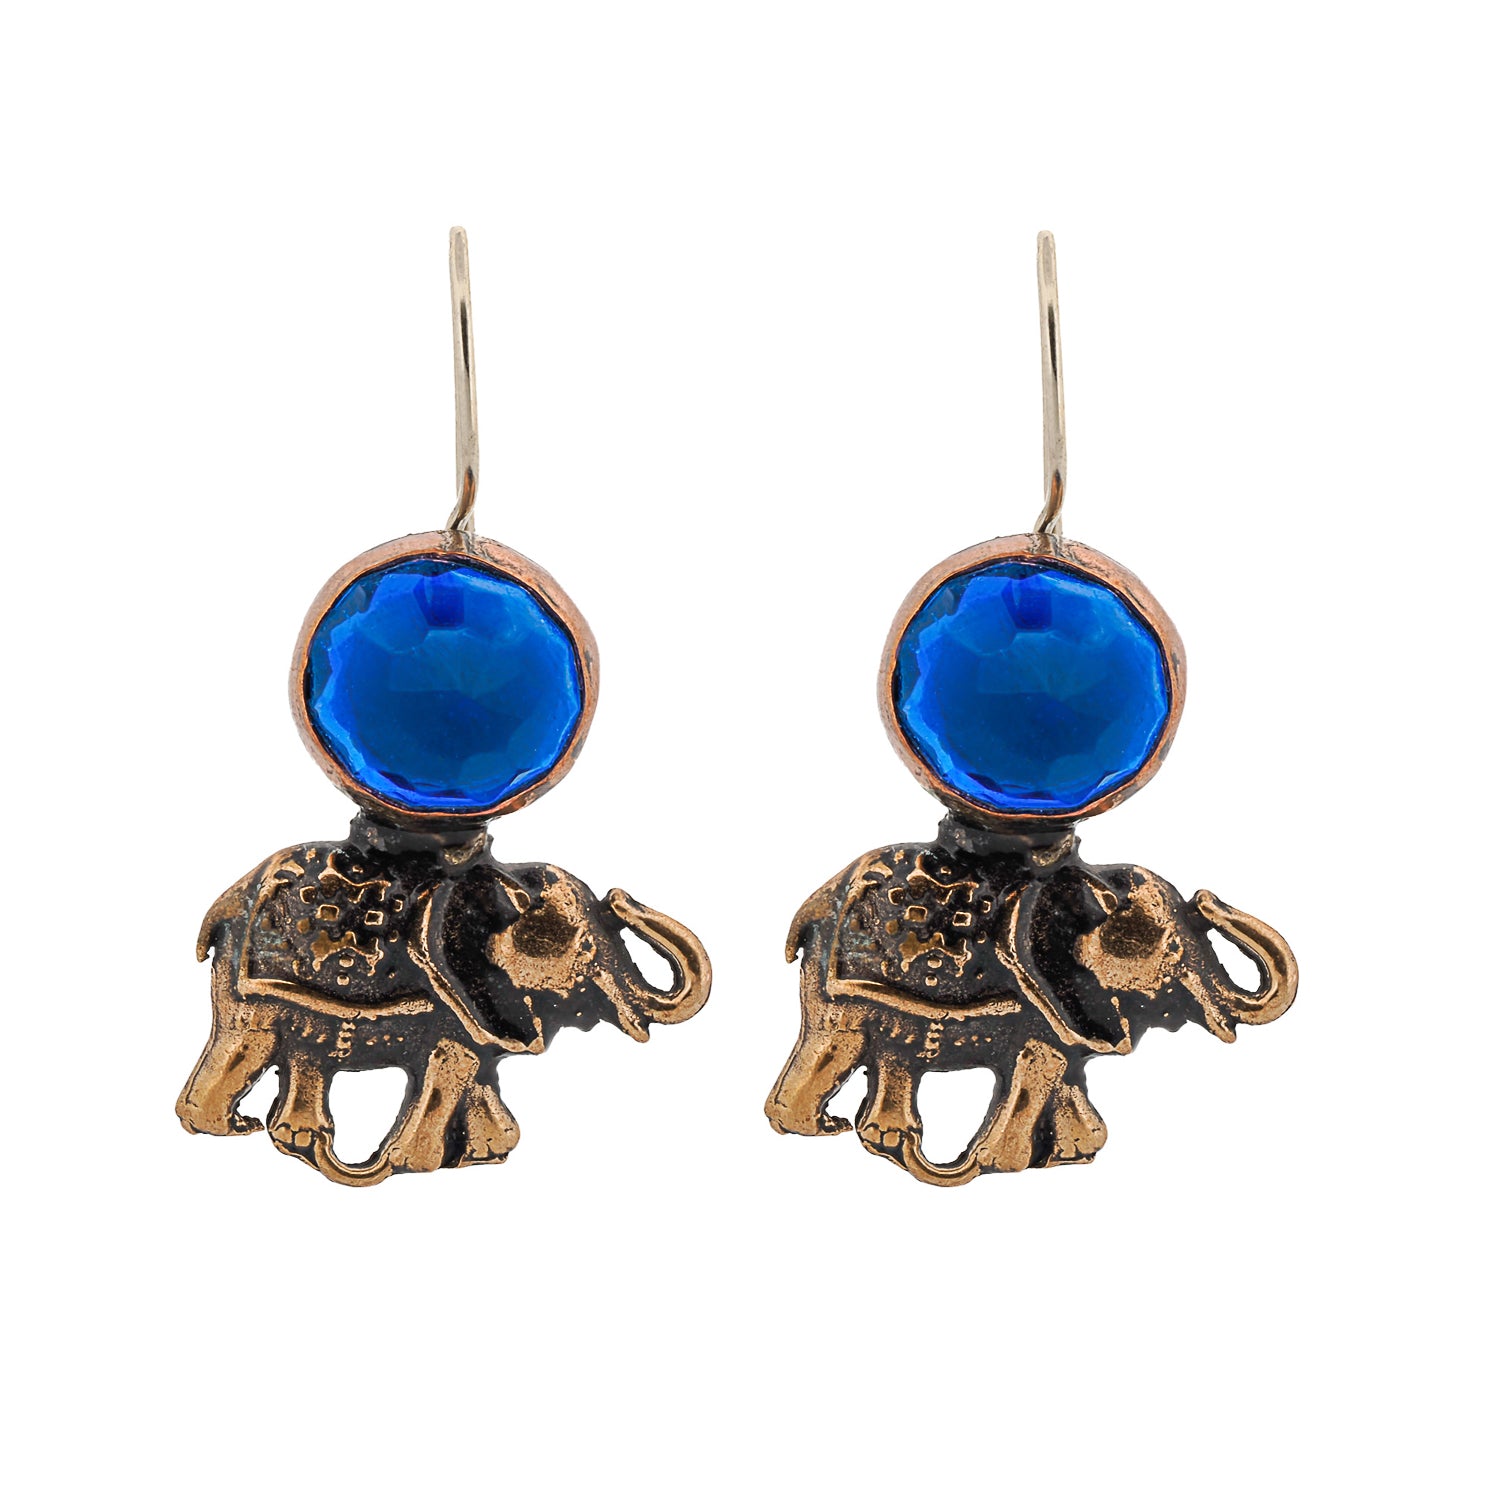 Handmade Unique Elephant Earrings with bronze charm and sapphire gemstones, a symbol of wisdom and joy.